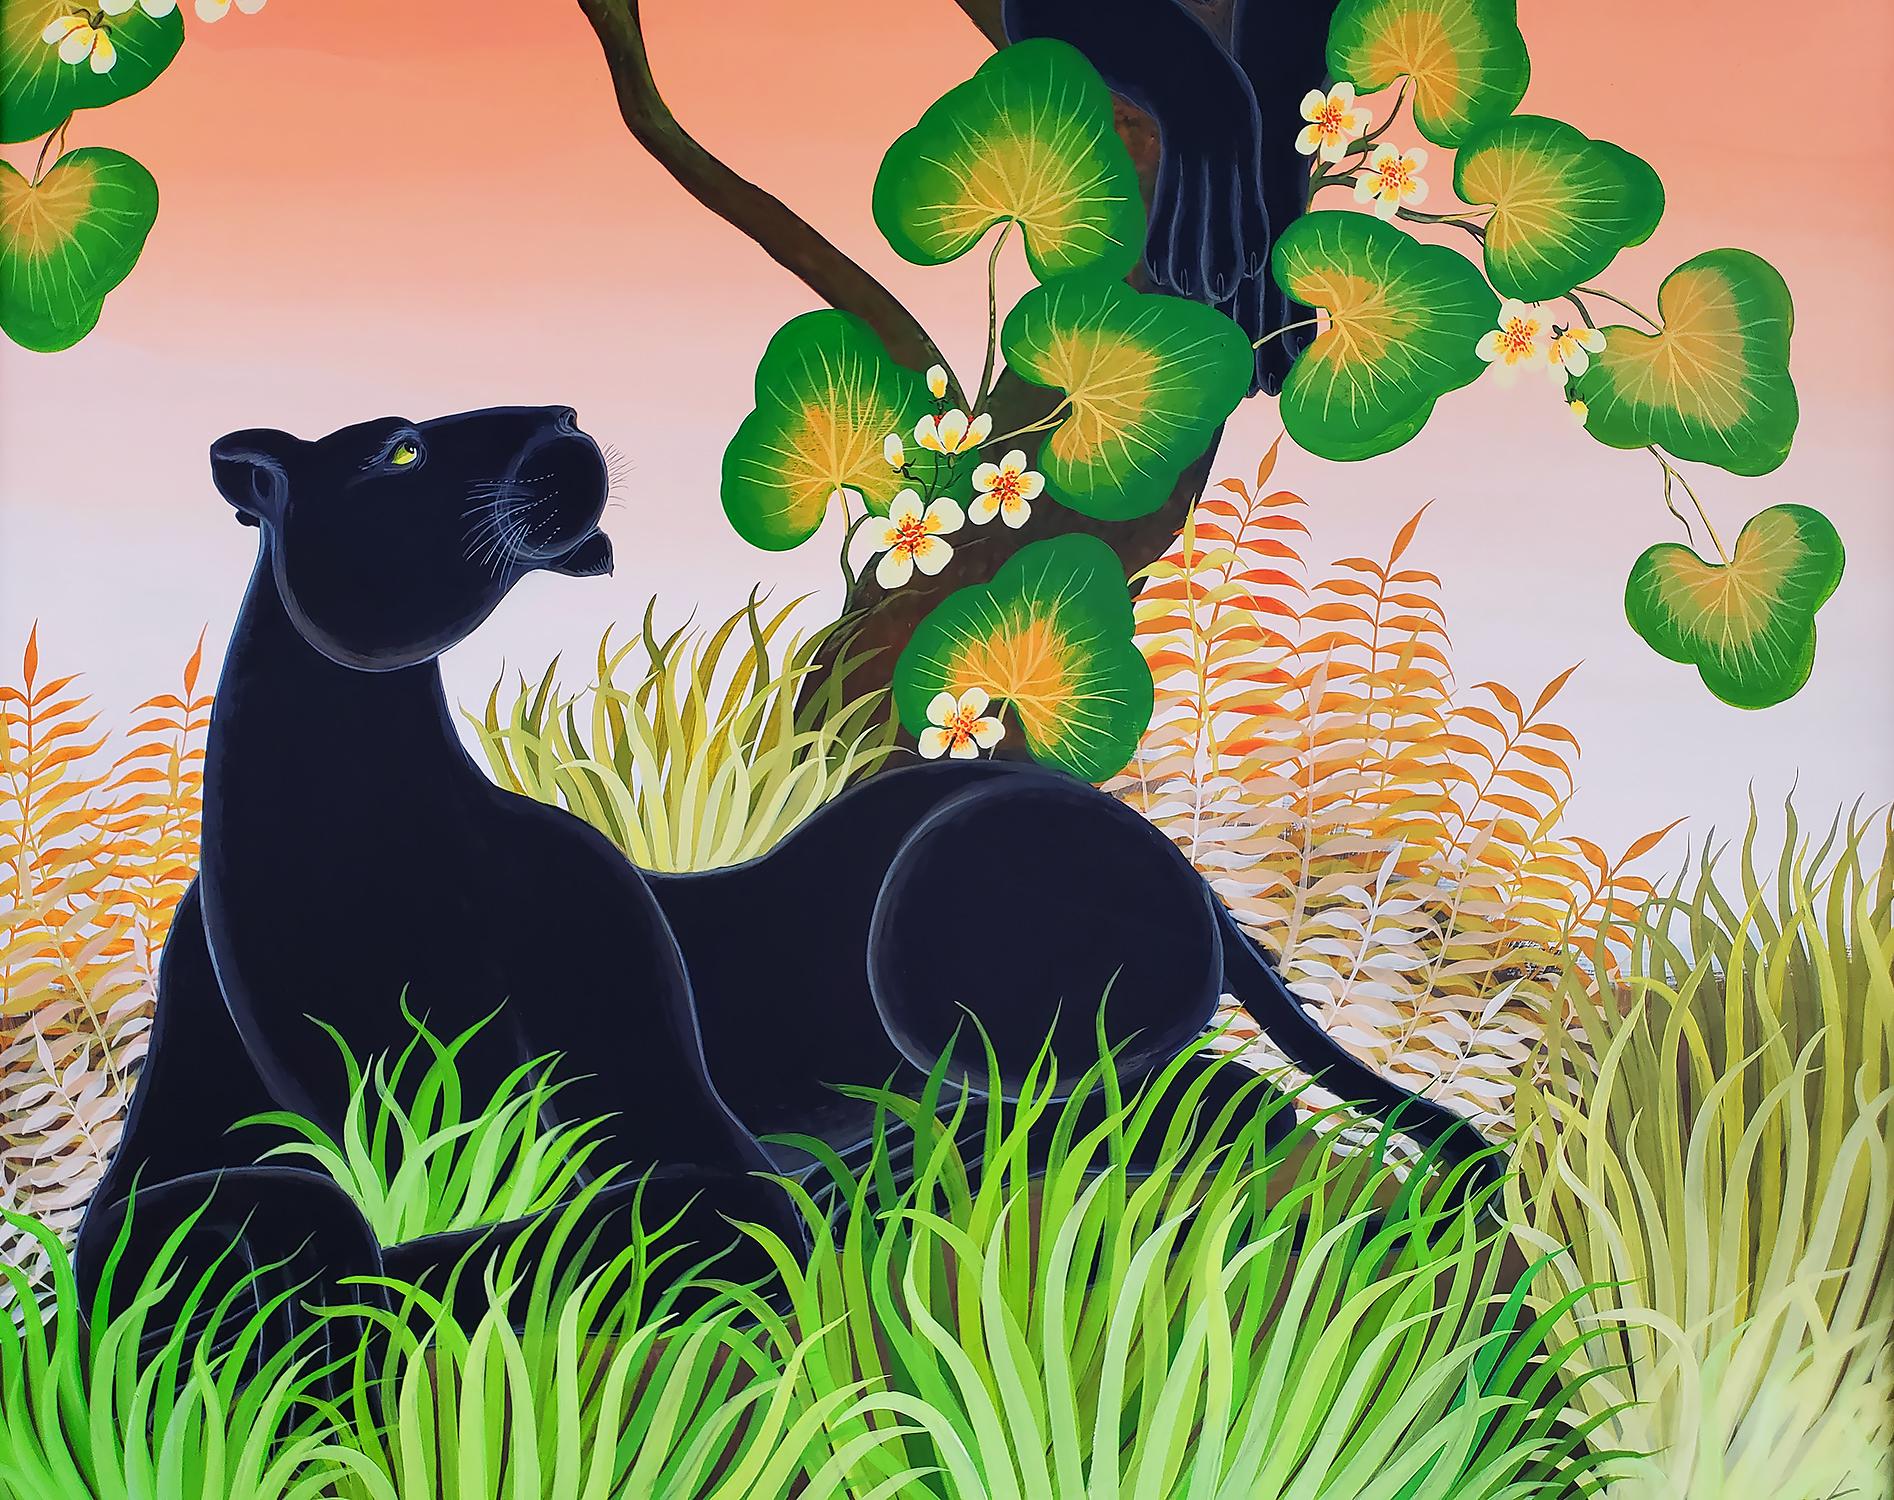 Black Panthers in a tree with a peach sky - Black Cats in Henri Maik Style - Orange Animal Painting by Gustavo Novoa